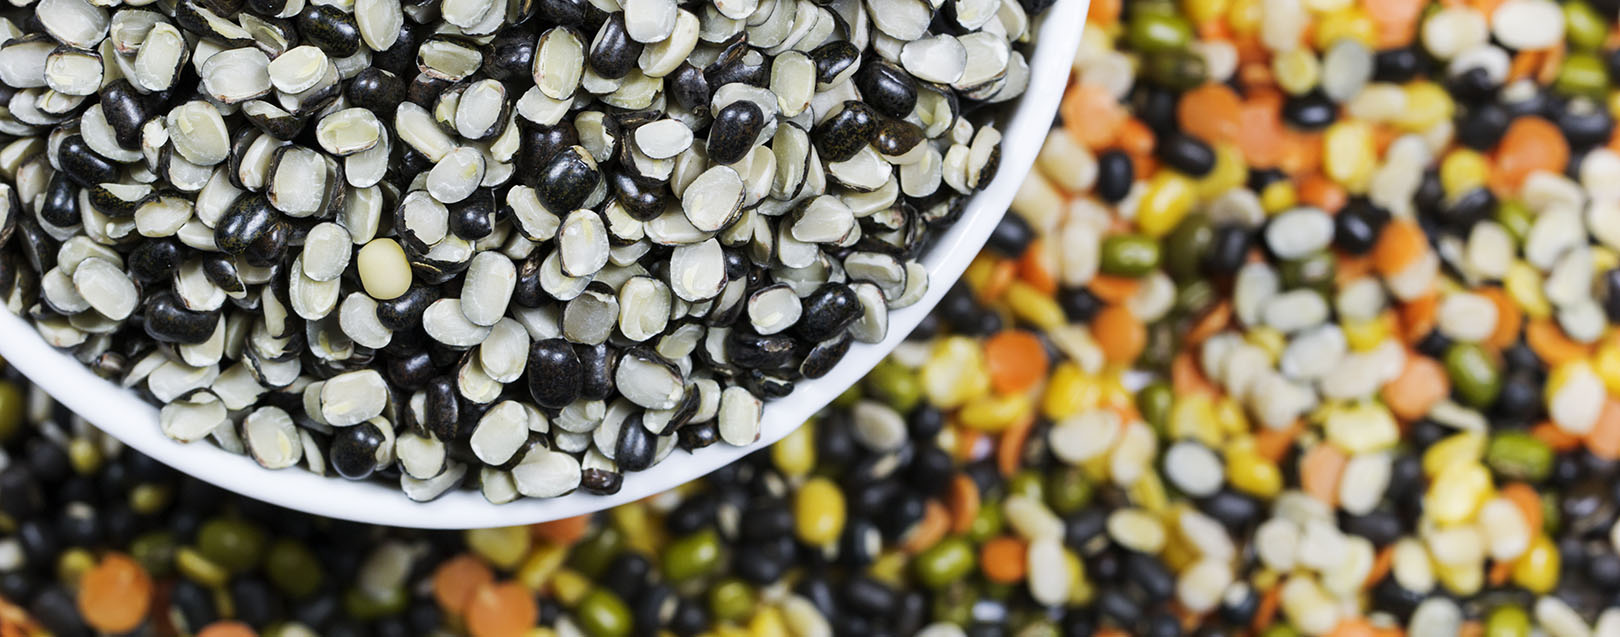 India's pulses import jumps 50% to Rs.25,500 cr in FY16